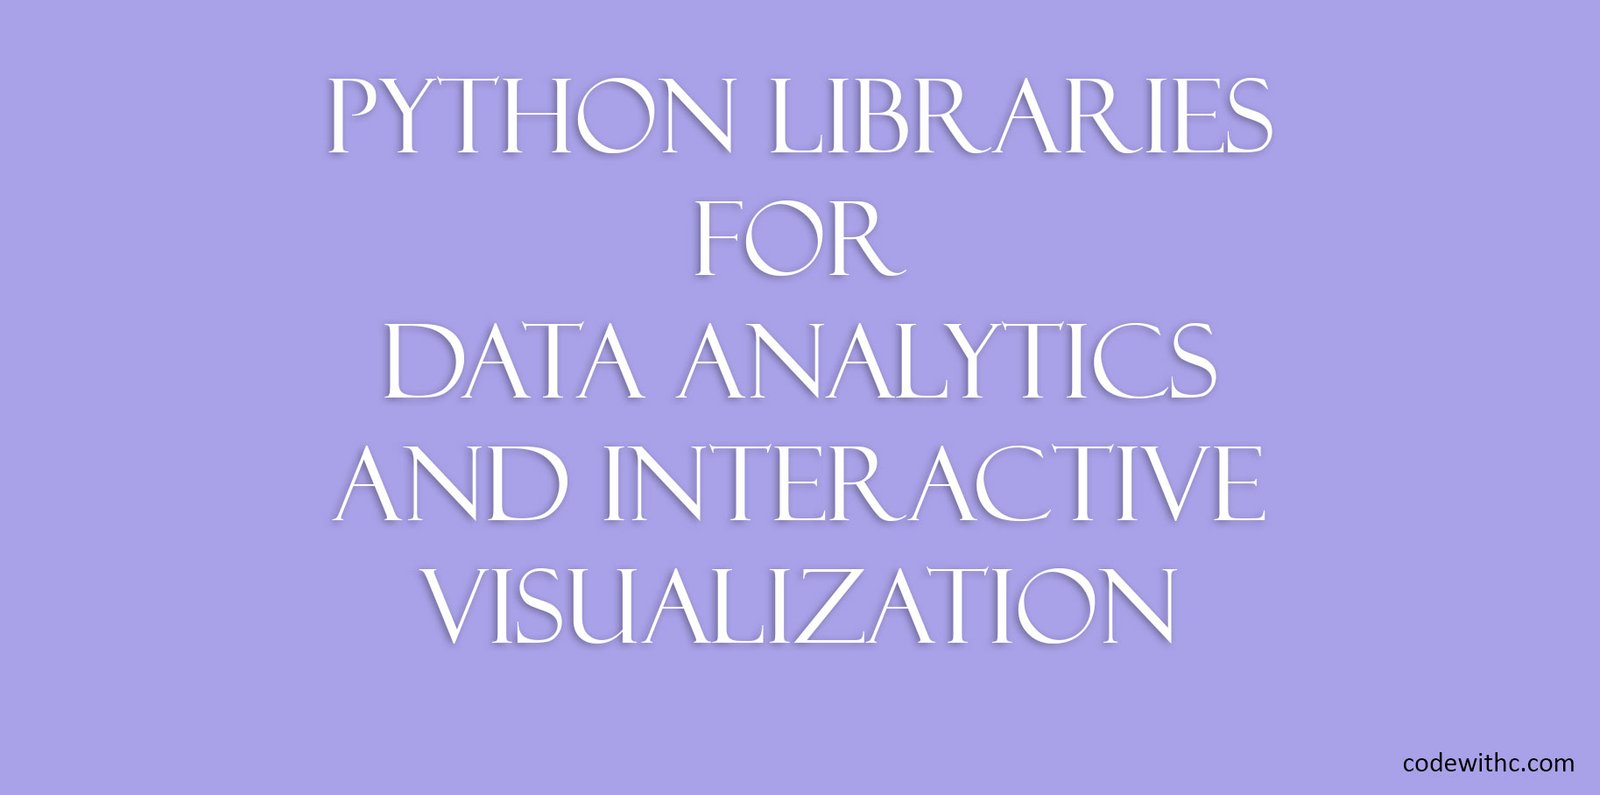 Python Libraries For Data Analytics and Interactive Visualization